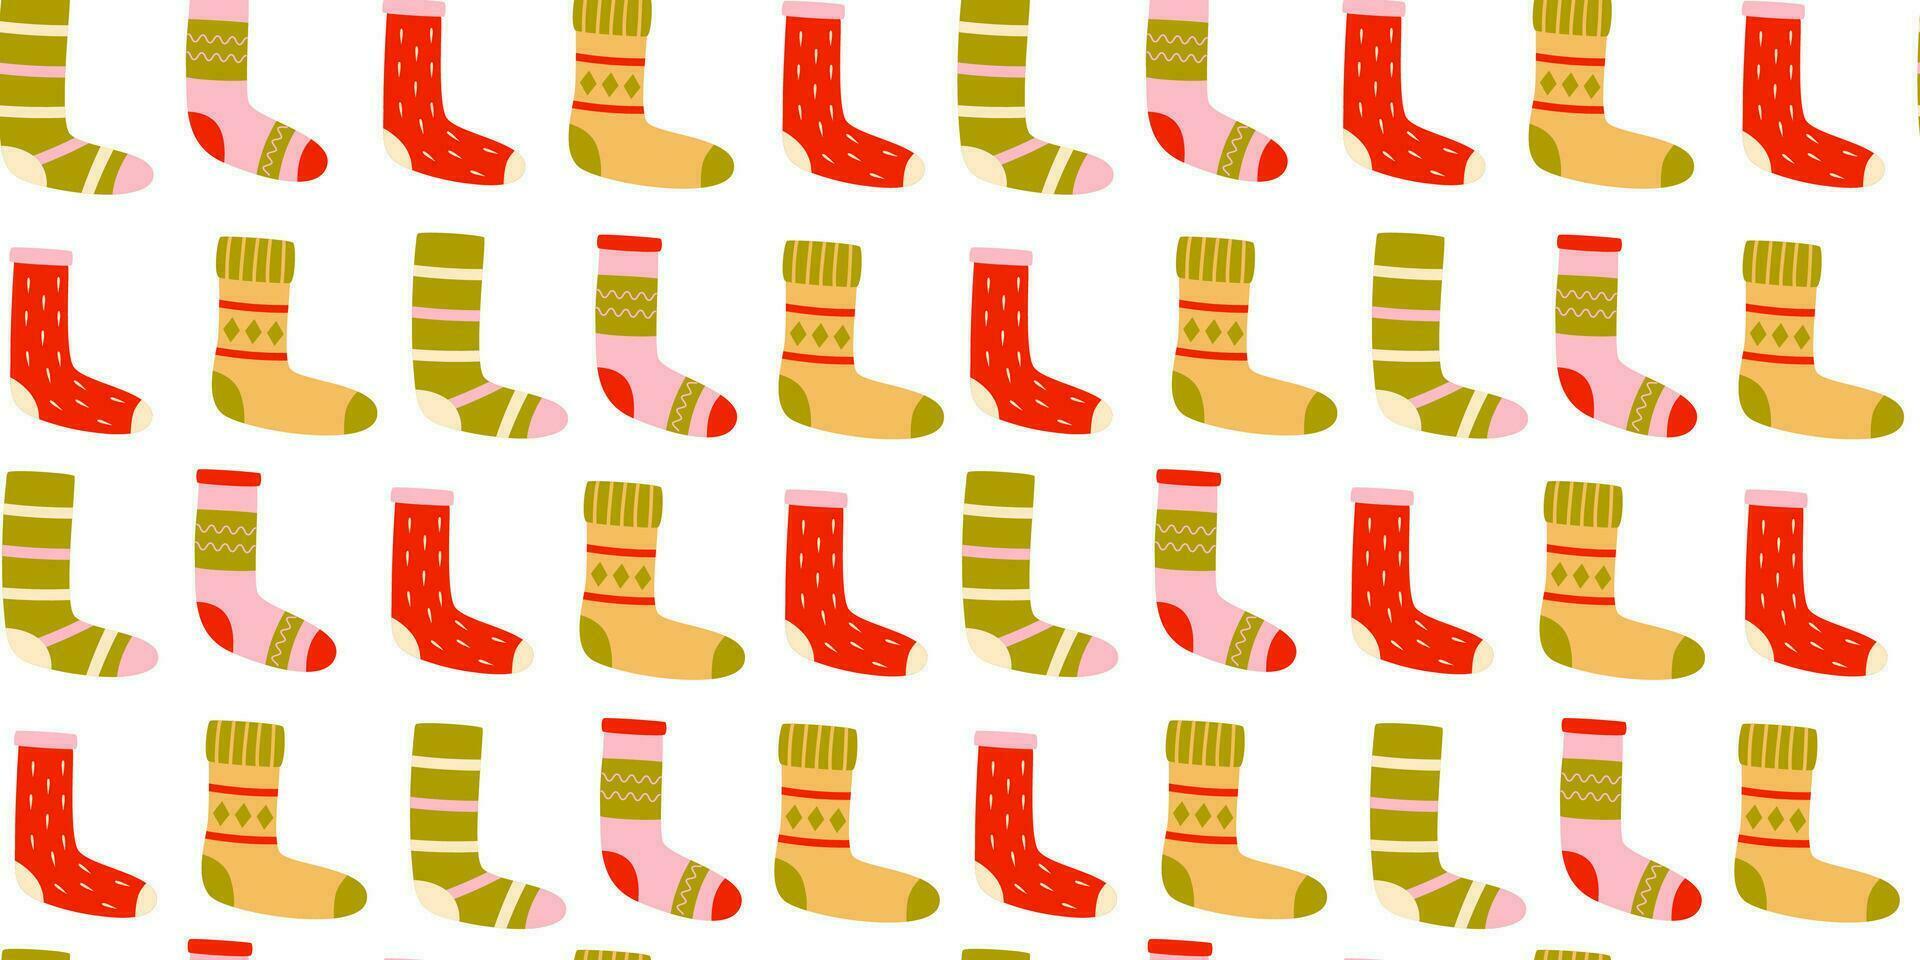 Hanging stockings seamless pattern. Santa socks. Autumn and winter knitted socks, foot wear. Background, digital paper, wrapping paper. vector